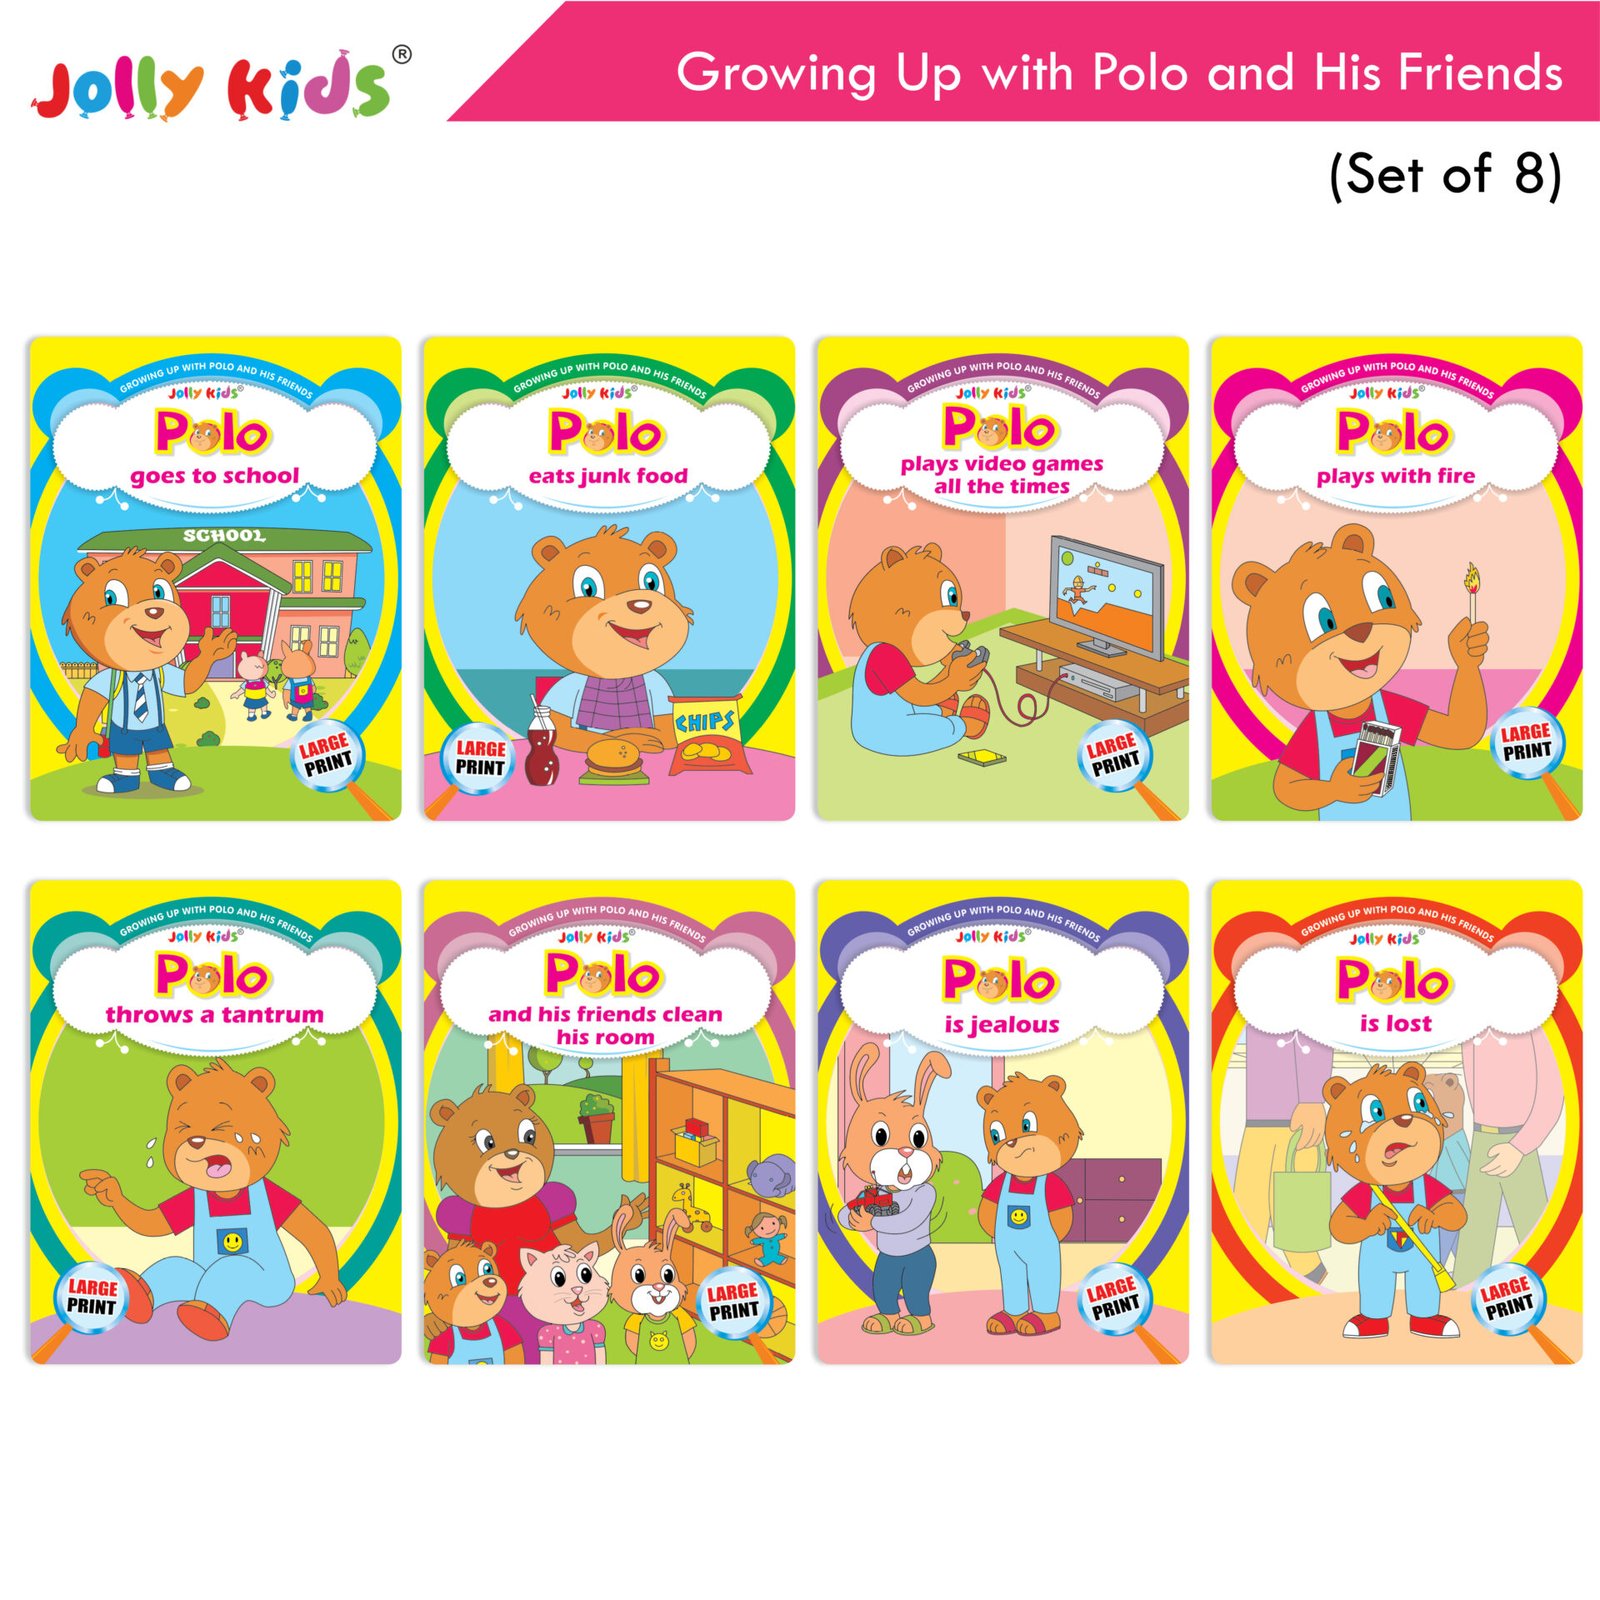 Jolly Kids Growing Up with Polo and His Friends Set of 8 1 1